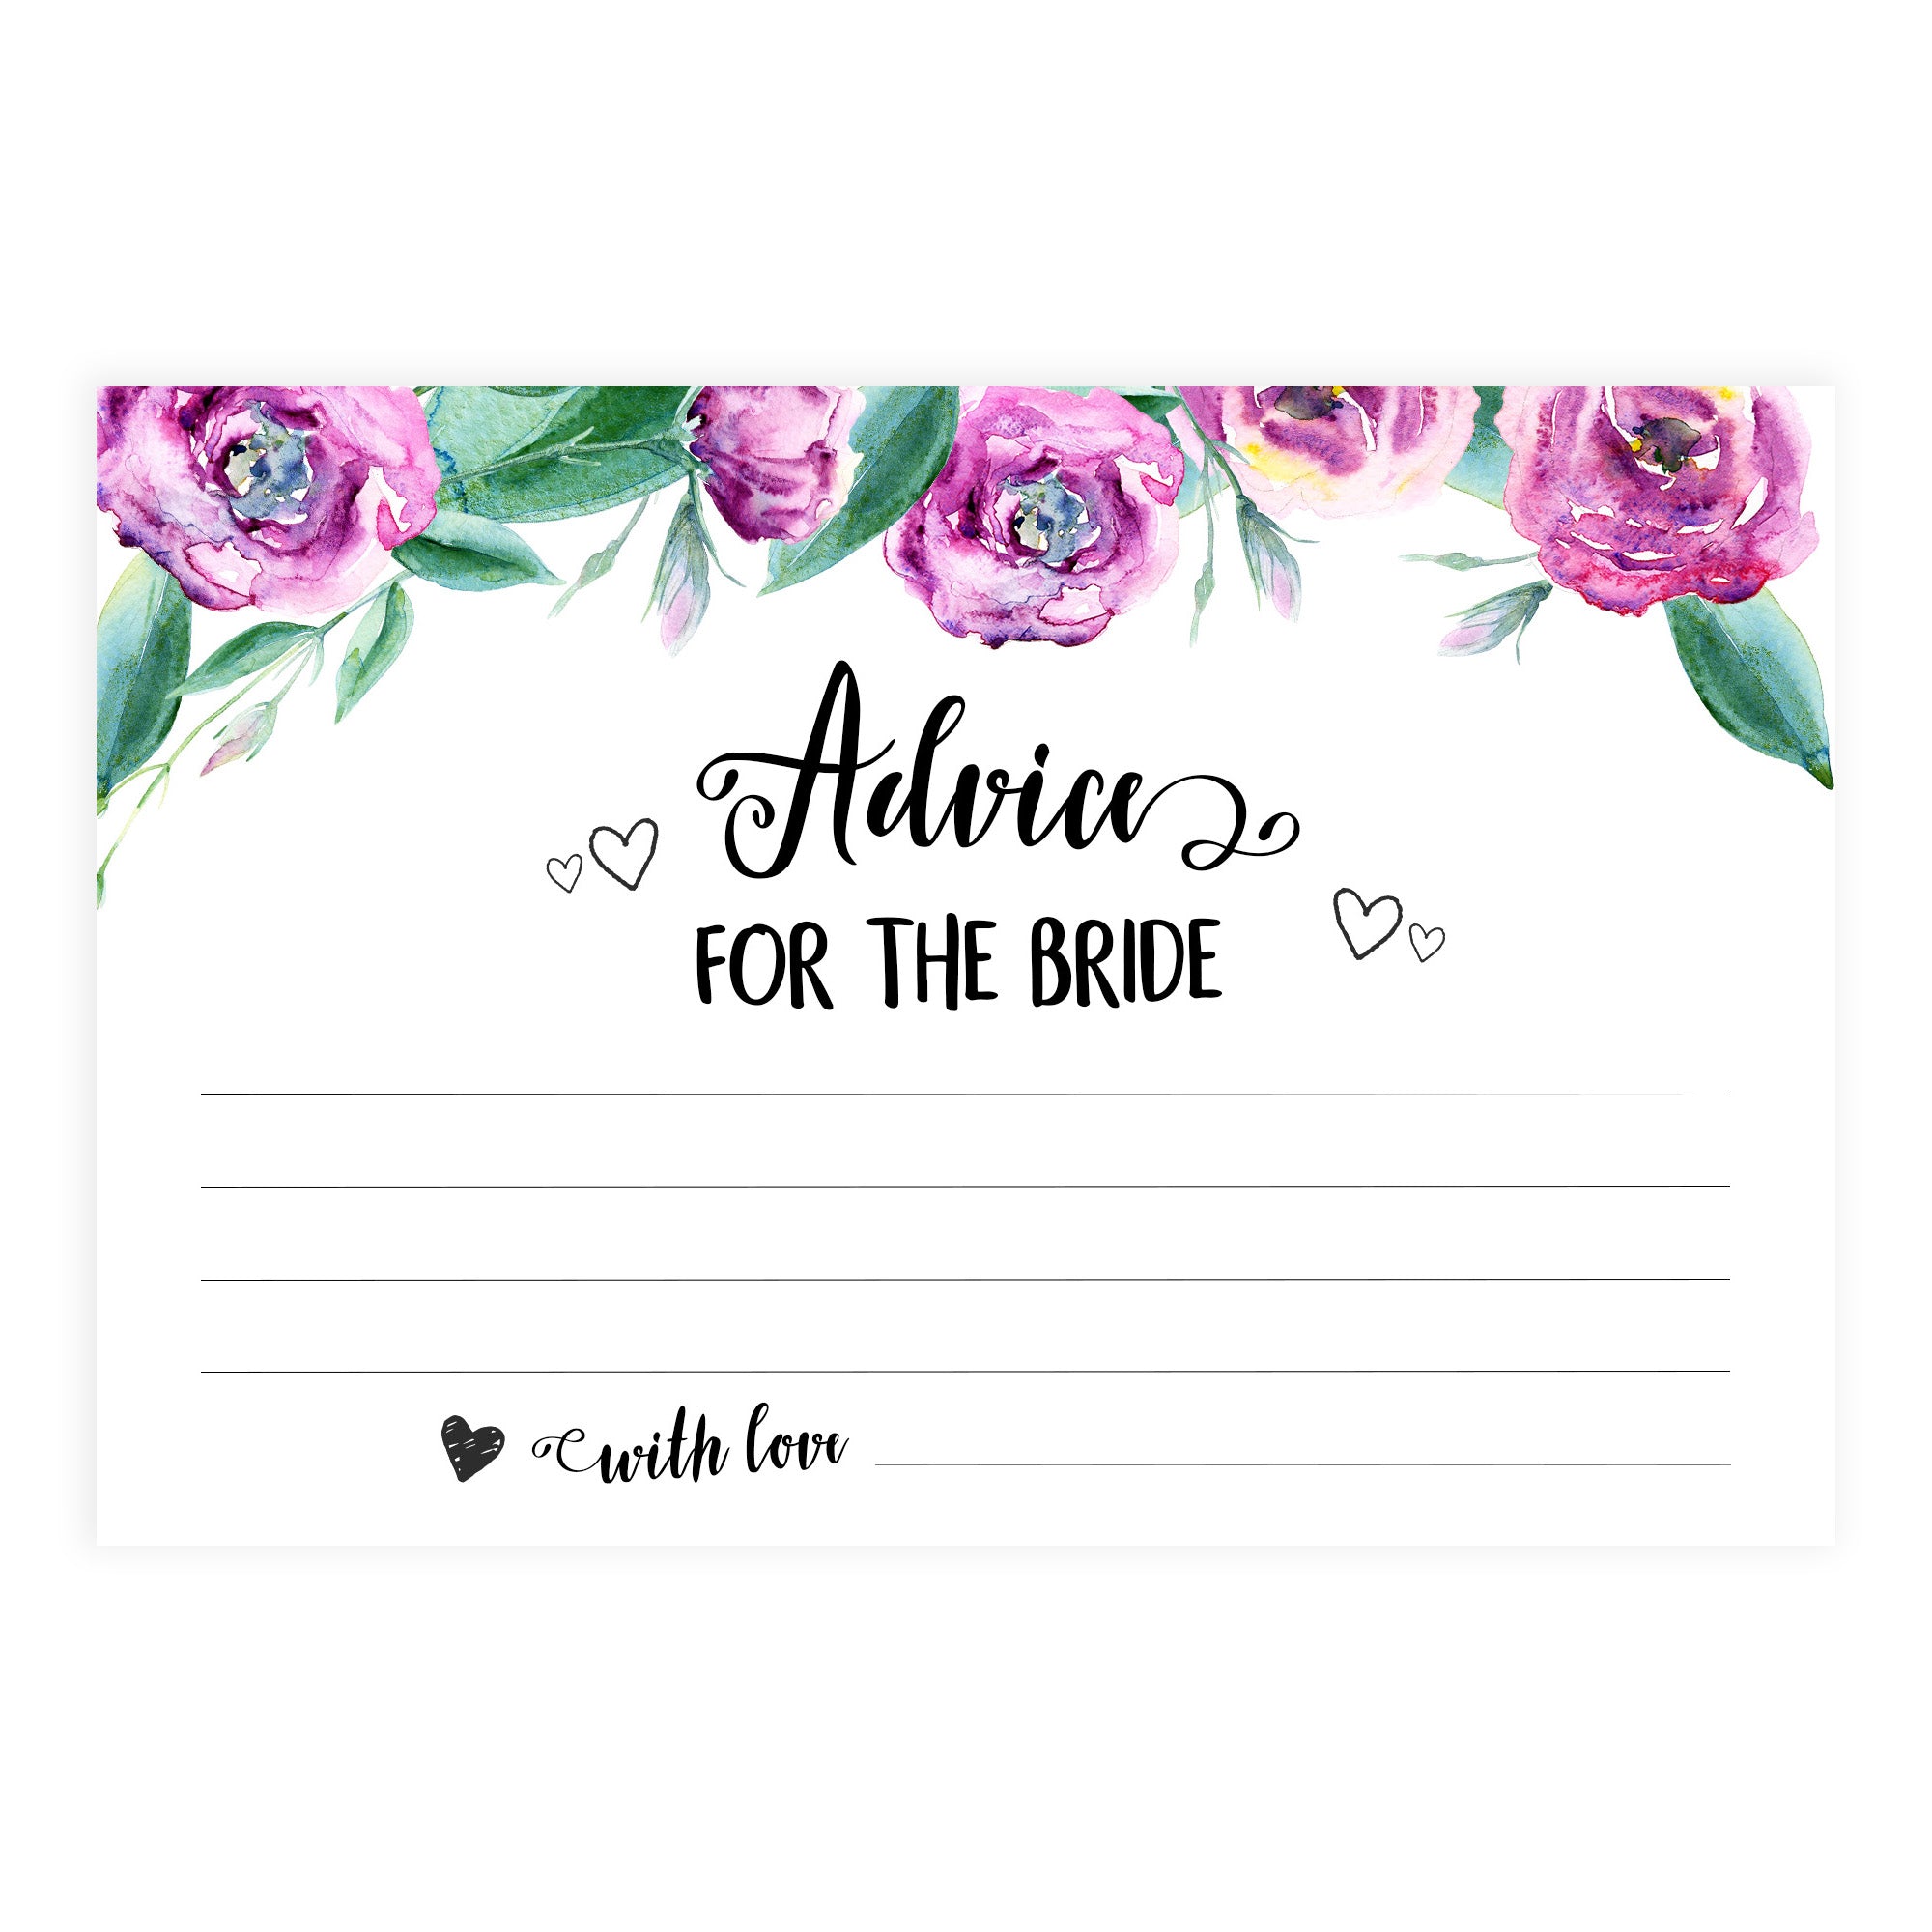 Advice for the Bride Cards - Purple Peonies